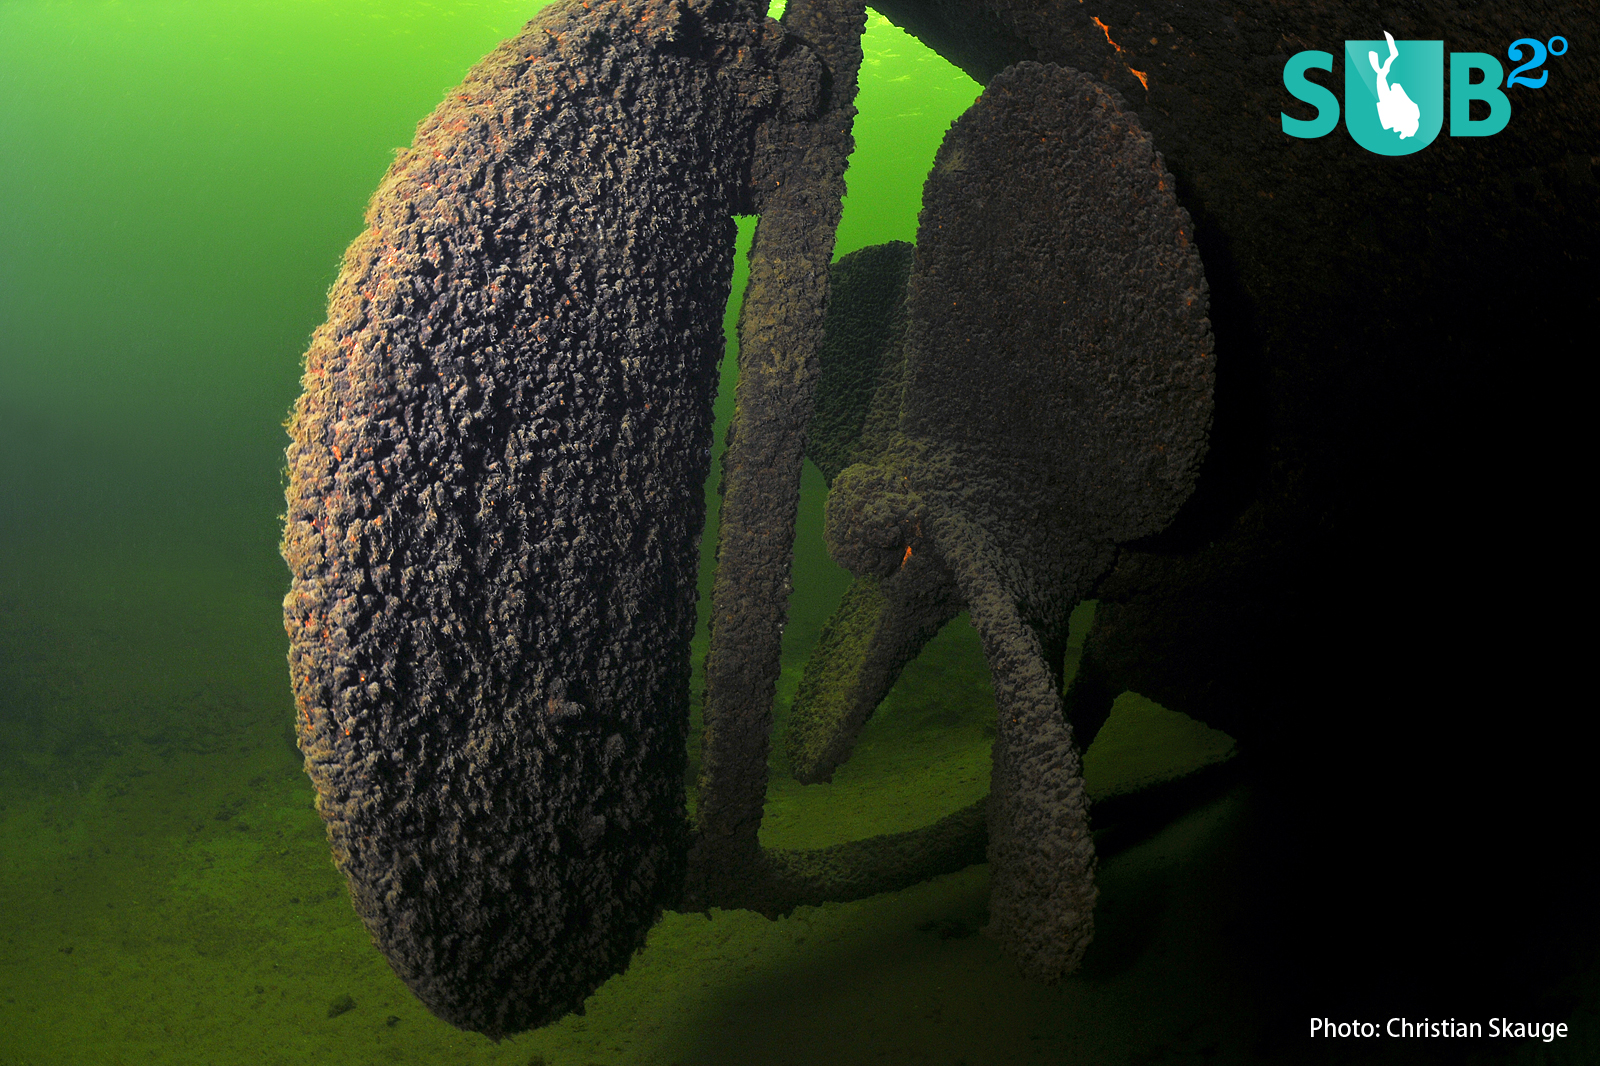 The rudder and propeller of S/S Dølen is still intact, much to the delight of photographers.